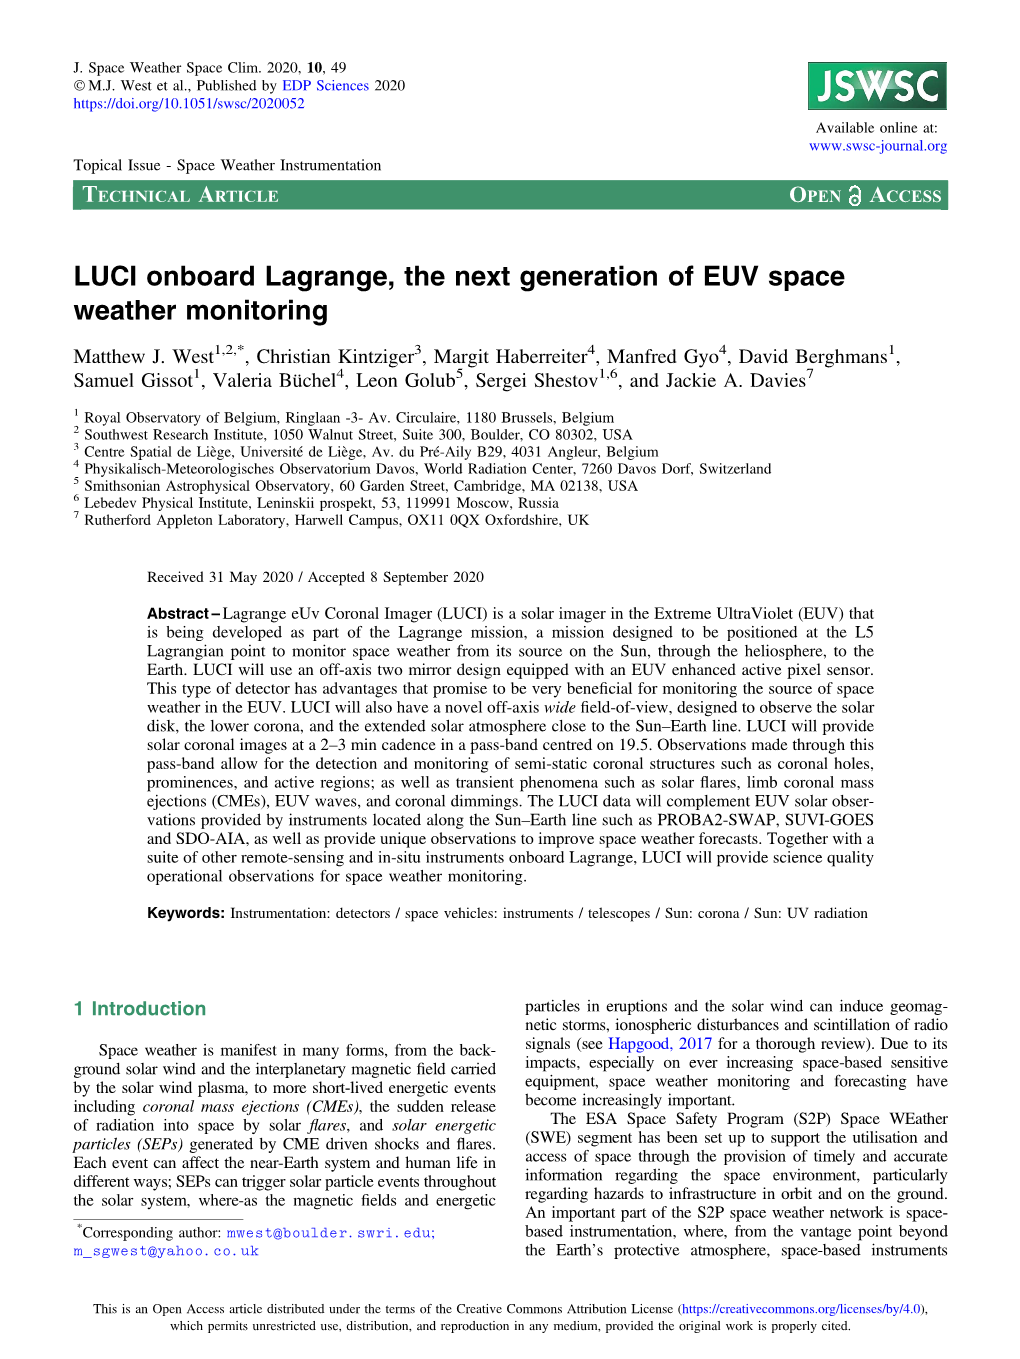 LUCI Onboard Lagrange, the Next Generation of EUV Space Weather Monitoring